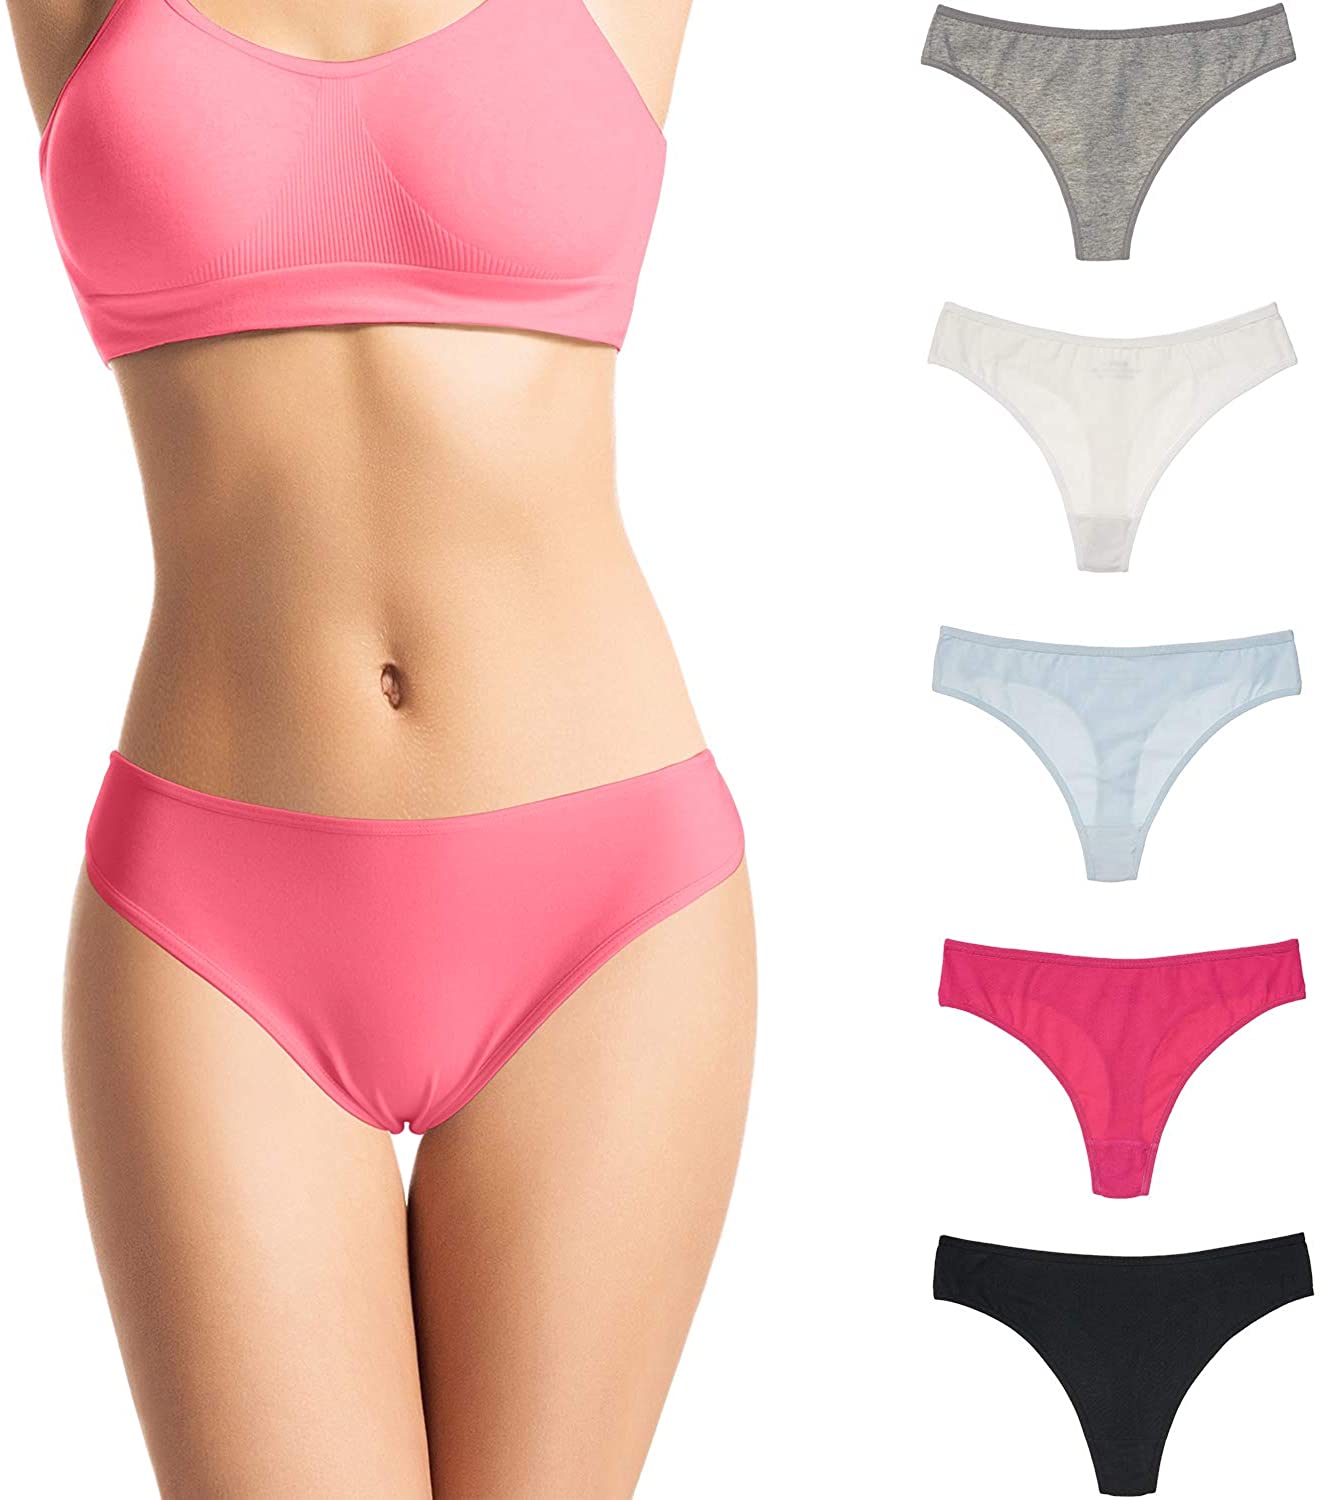 Price:$9.98    FROLADA Women's Underwear Sexy Thongs Seamless Low Waist Out T Back Soft Breathable Panties 5 Pack  Clothing